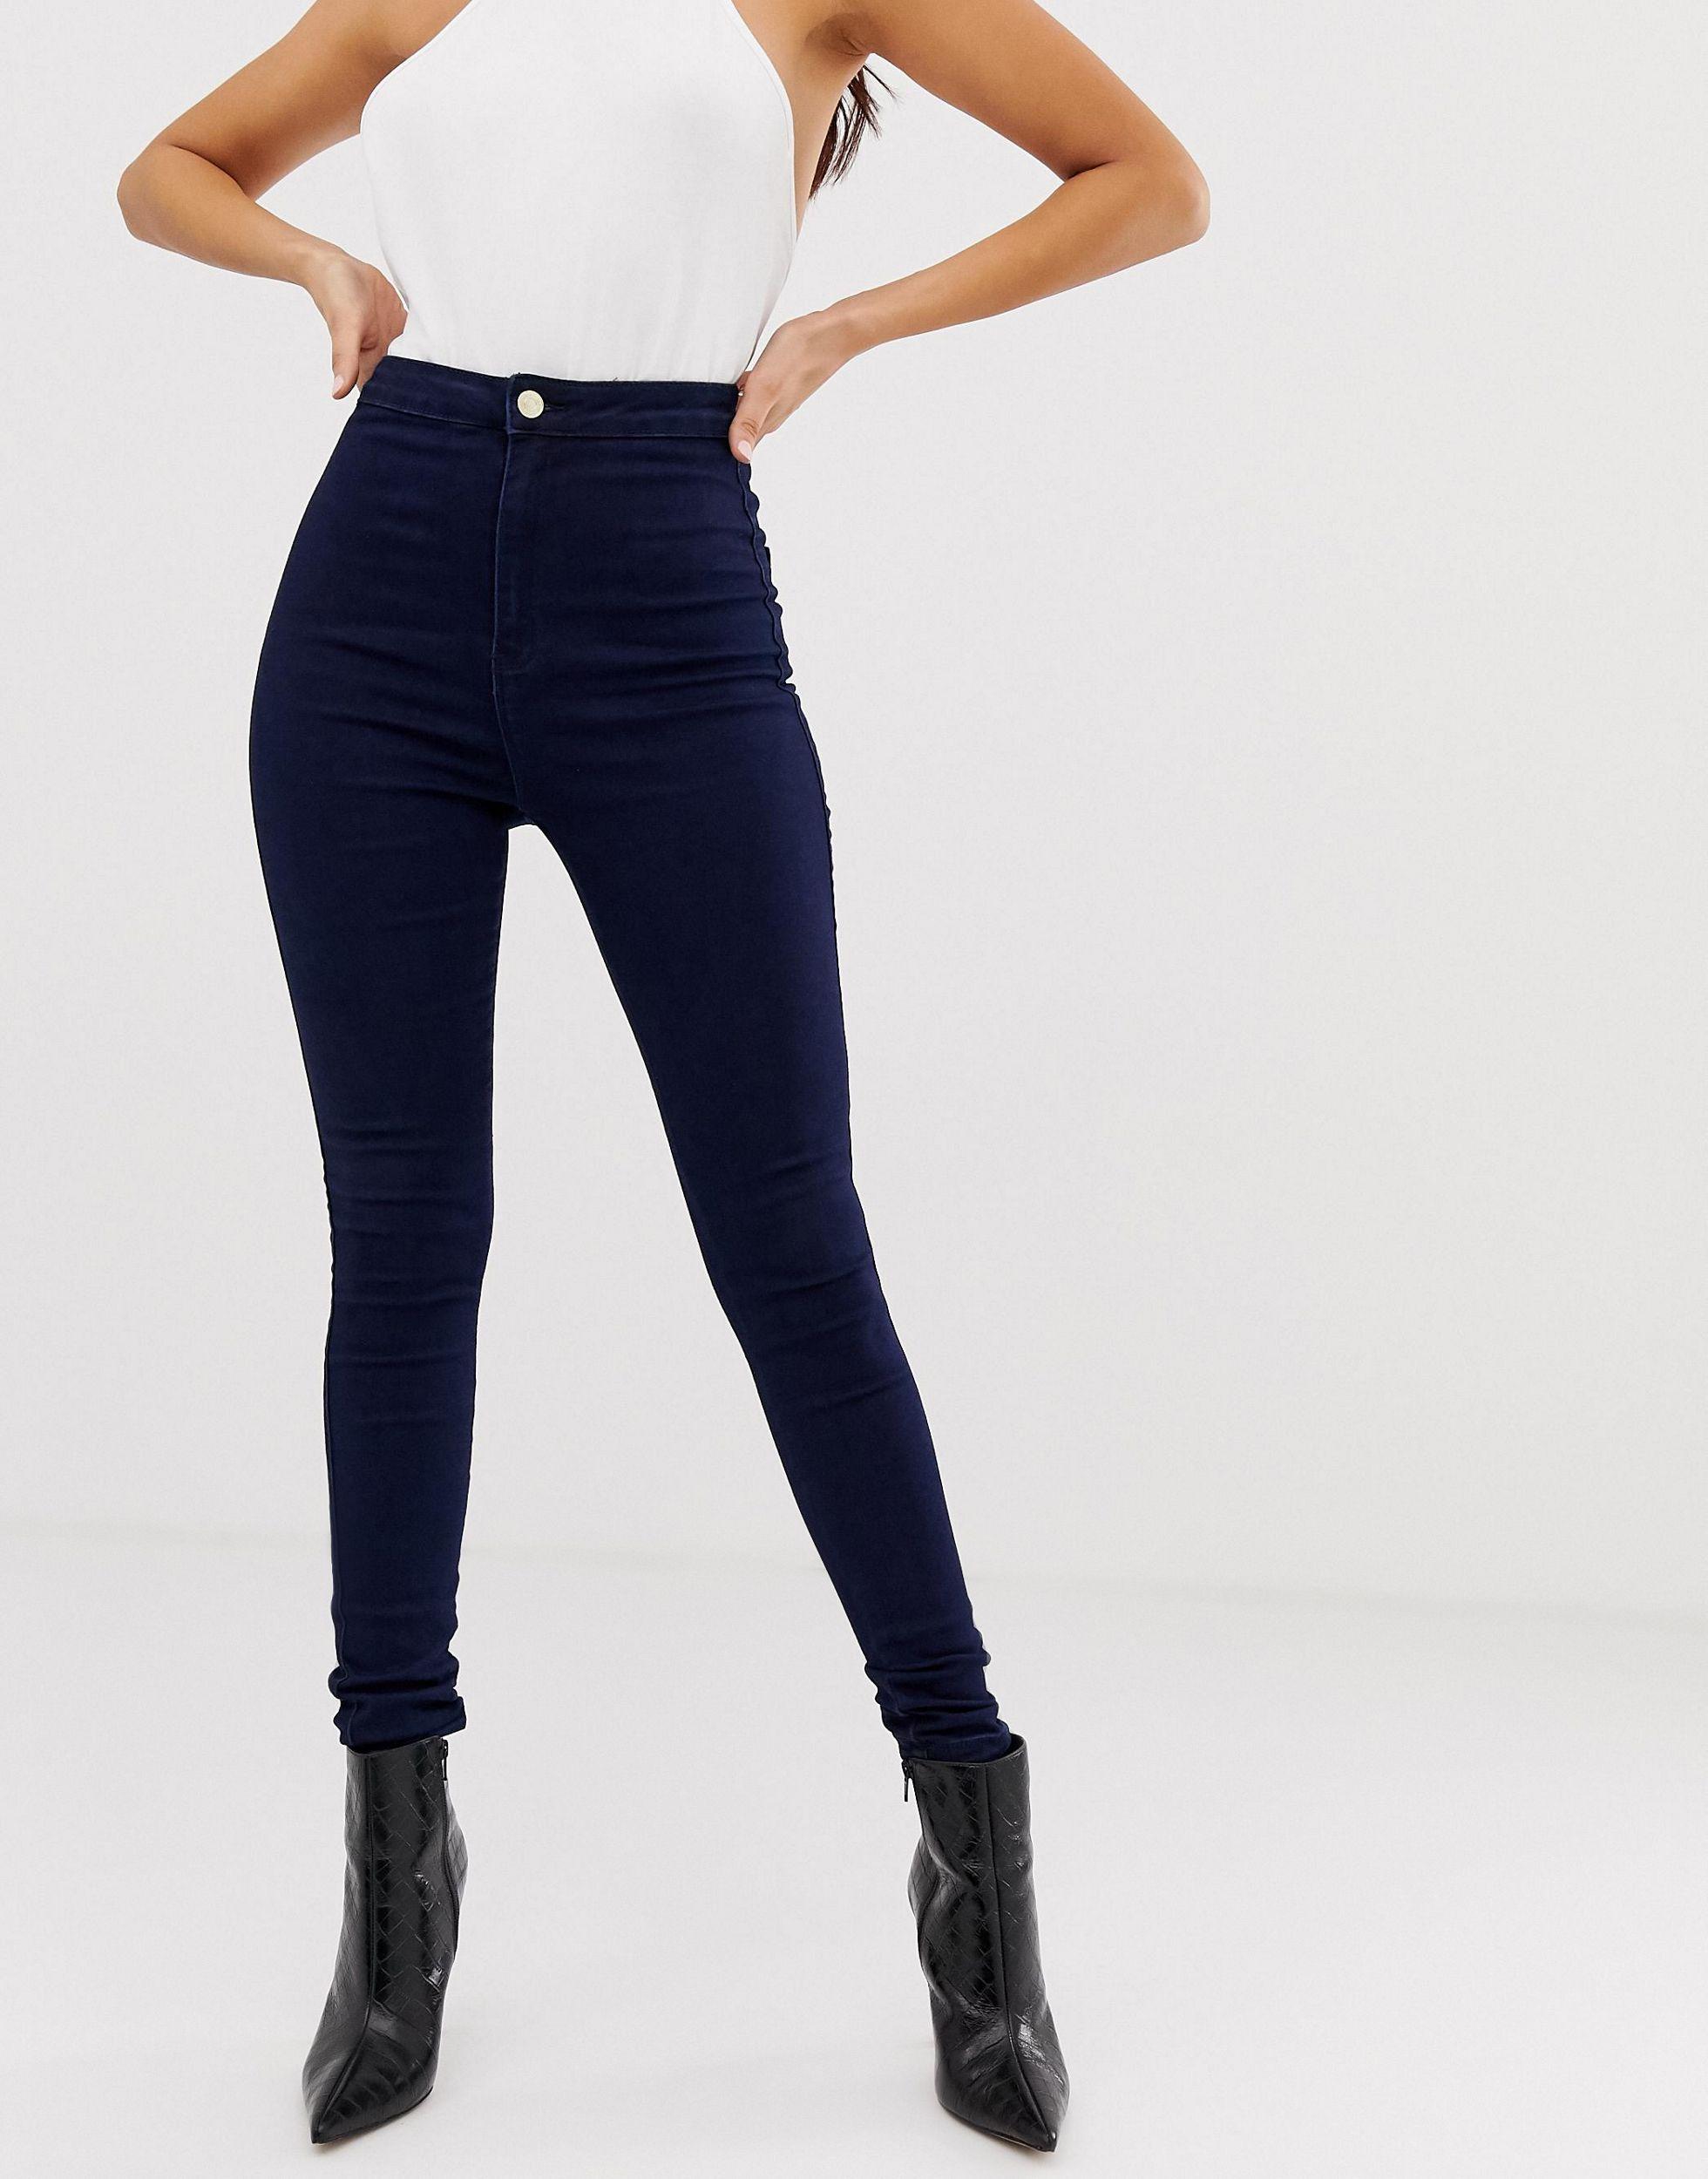 Missguided Denim Vice High Waisted Super Stretch Skinny Jean in Navy (Blue)  - Lyst